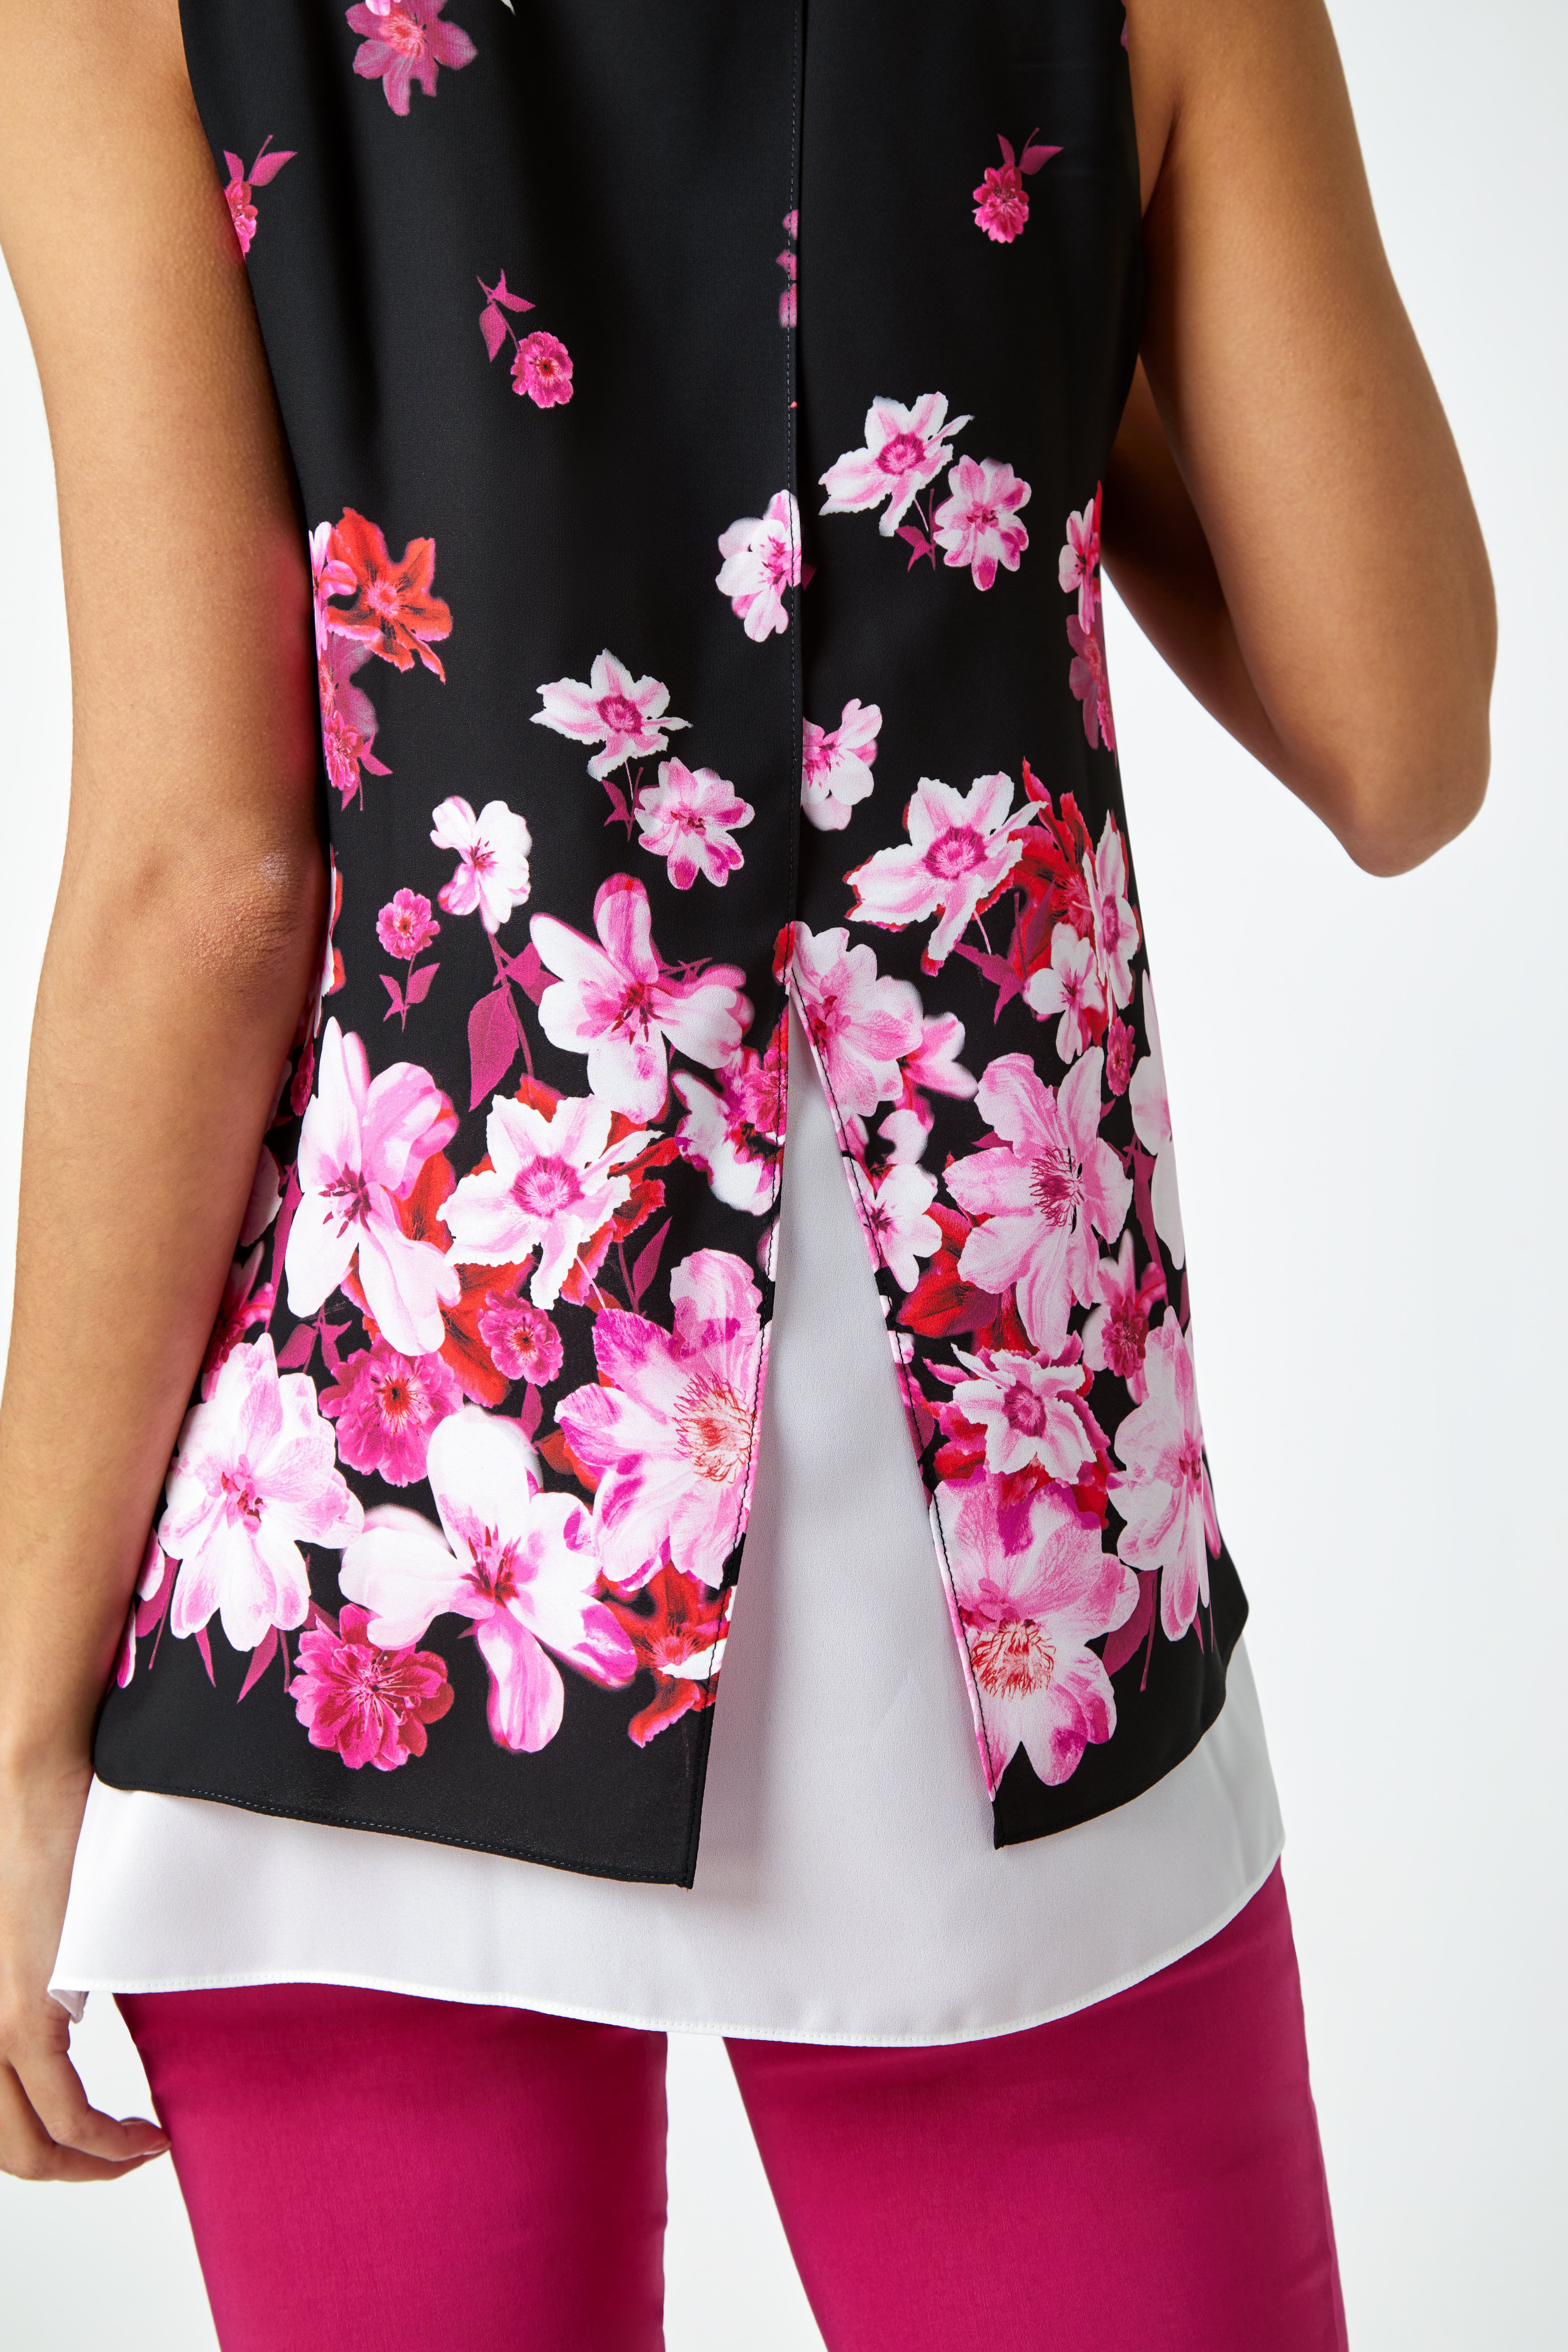 CERISE Sleeveless Floral Double Layer Top, Image 4 of 5